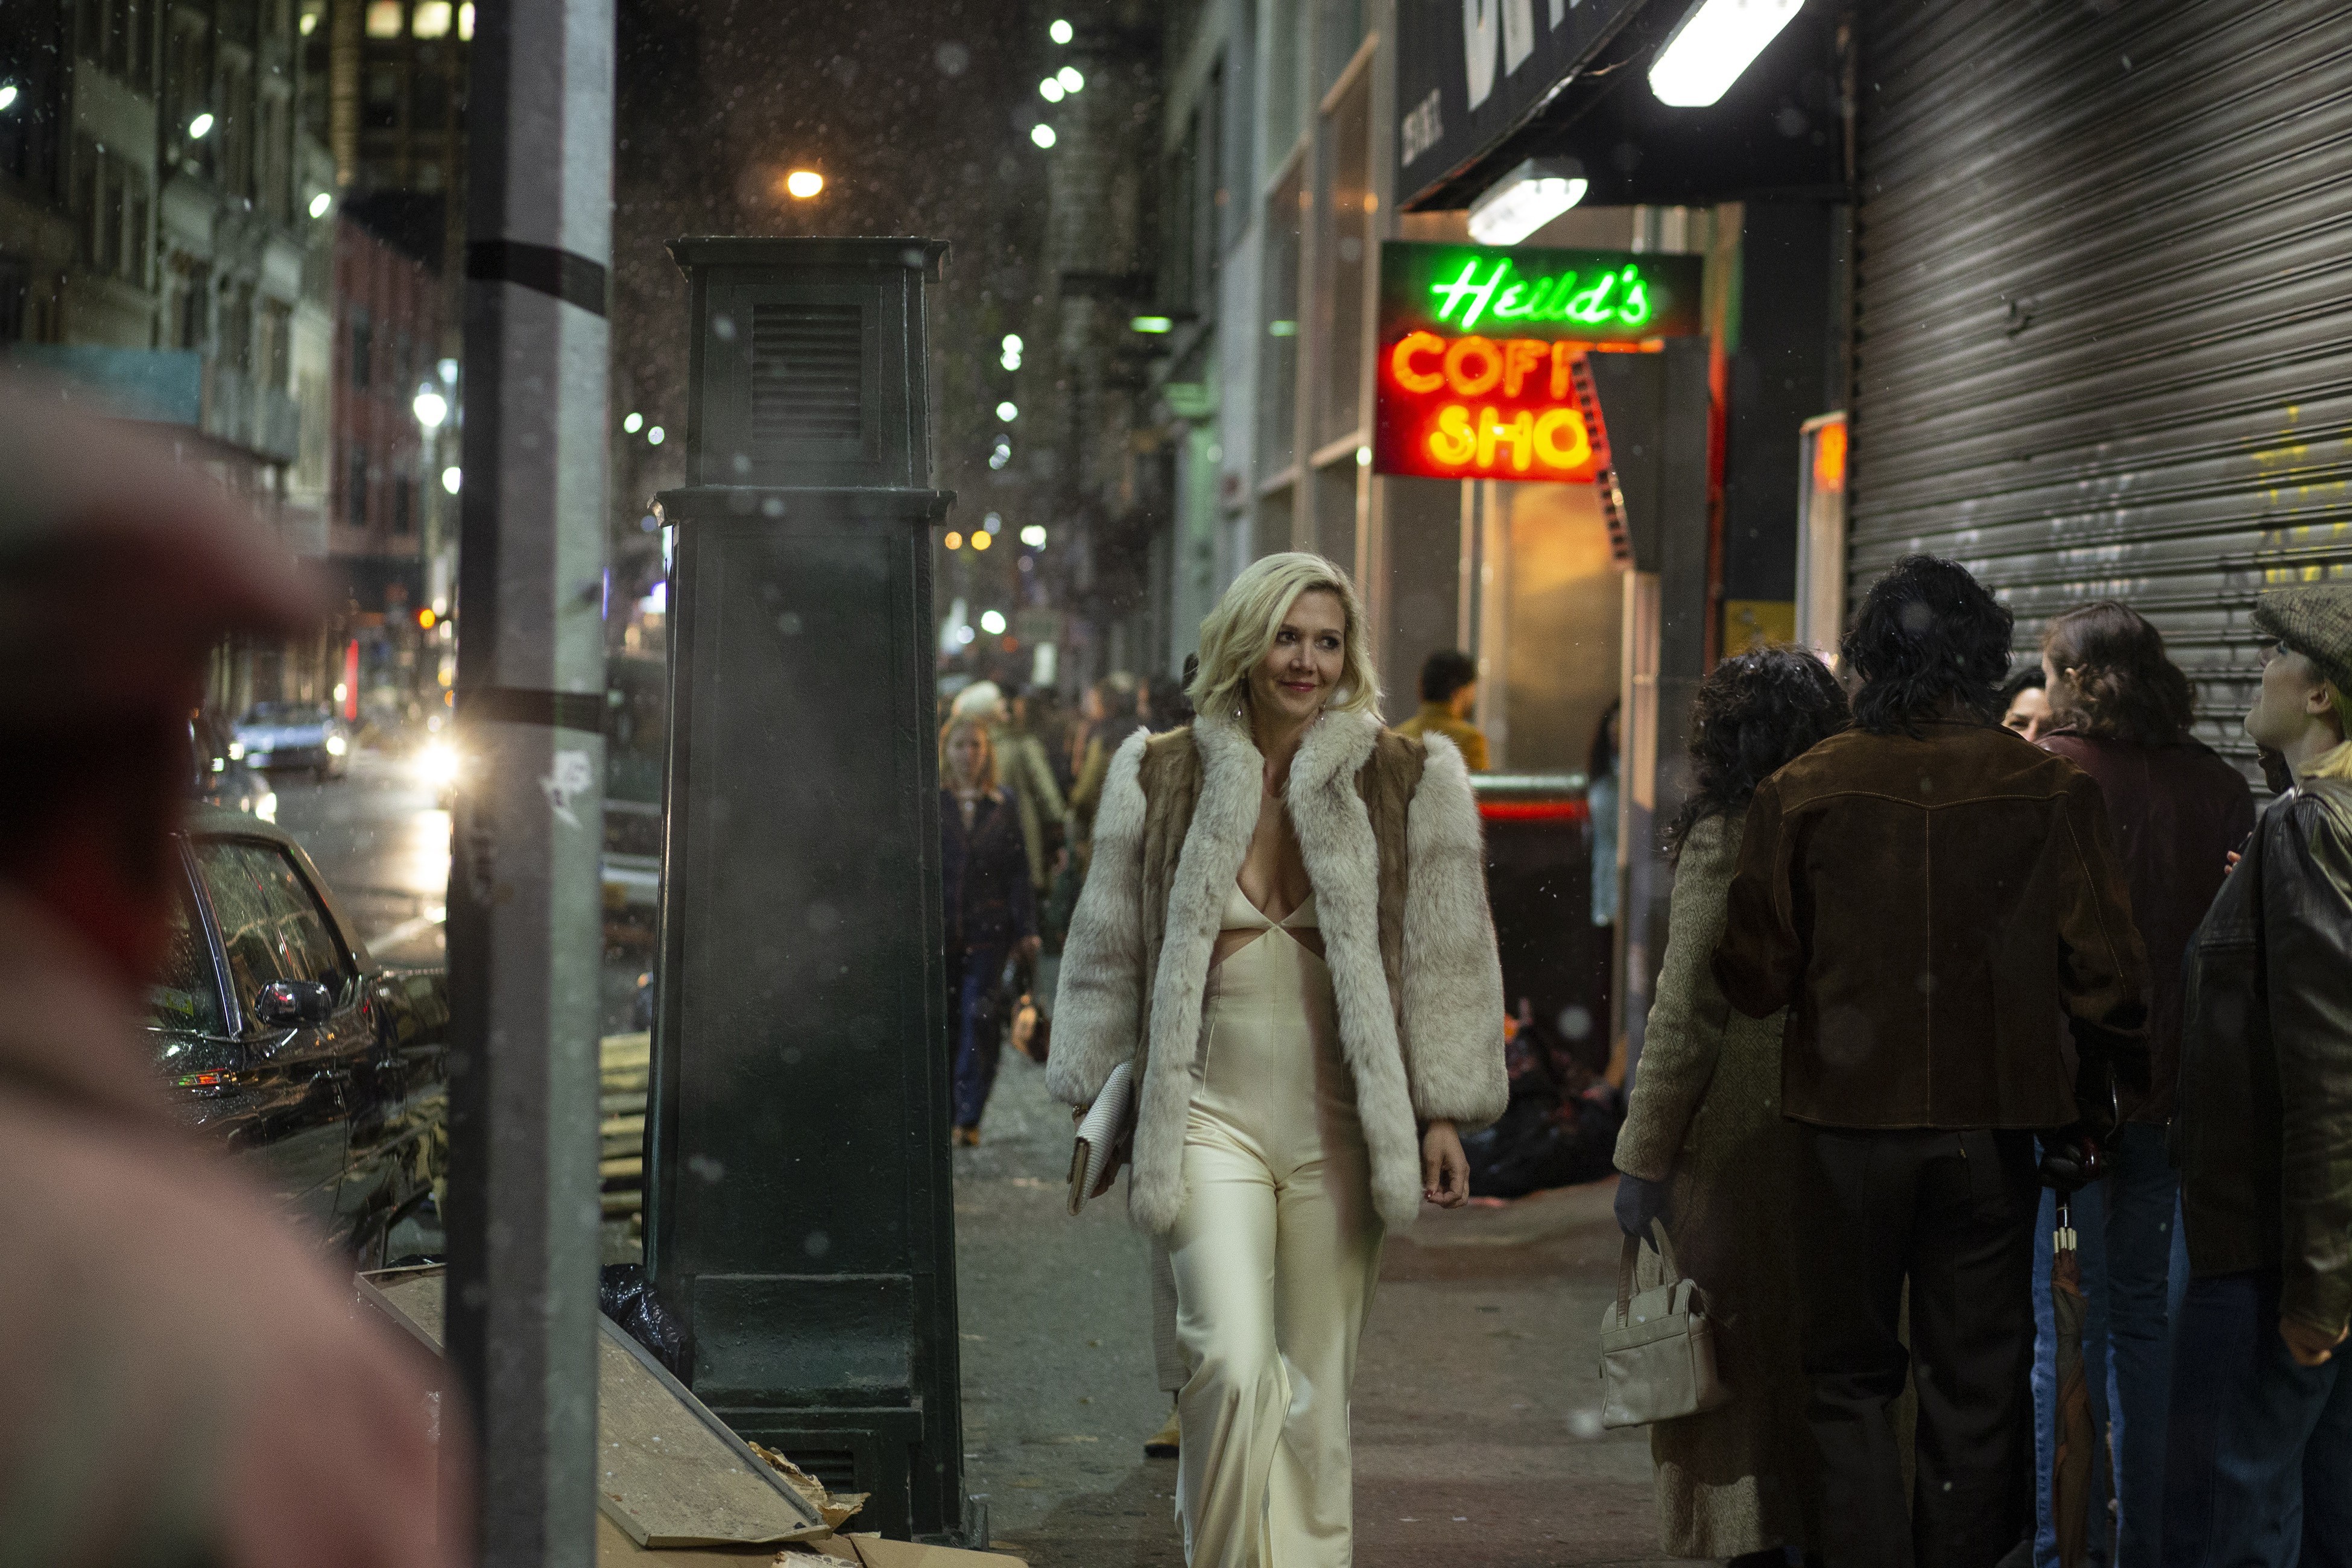 HBO's The Deuce Plays Dirty in Seedy New York for Season 2 | Miami New Times